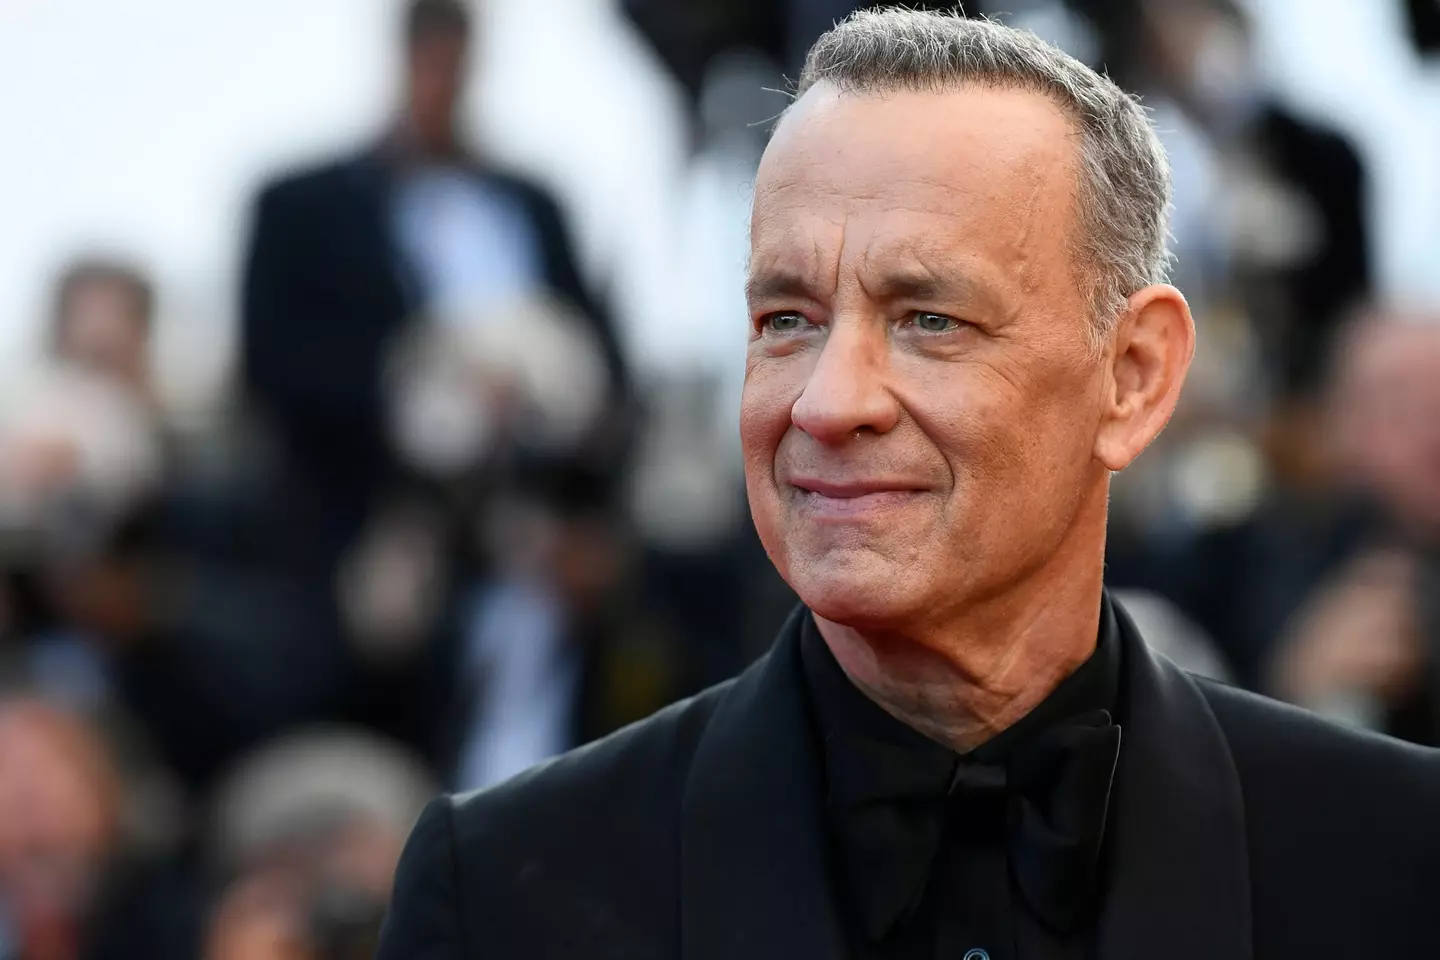 Tom Hanks offered his son some advice as they star in a new film together.